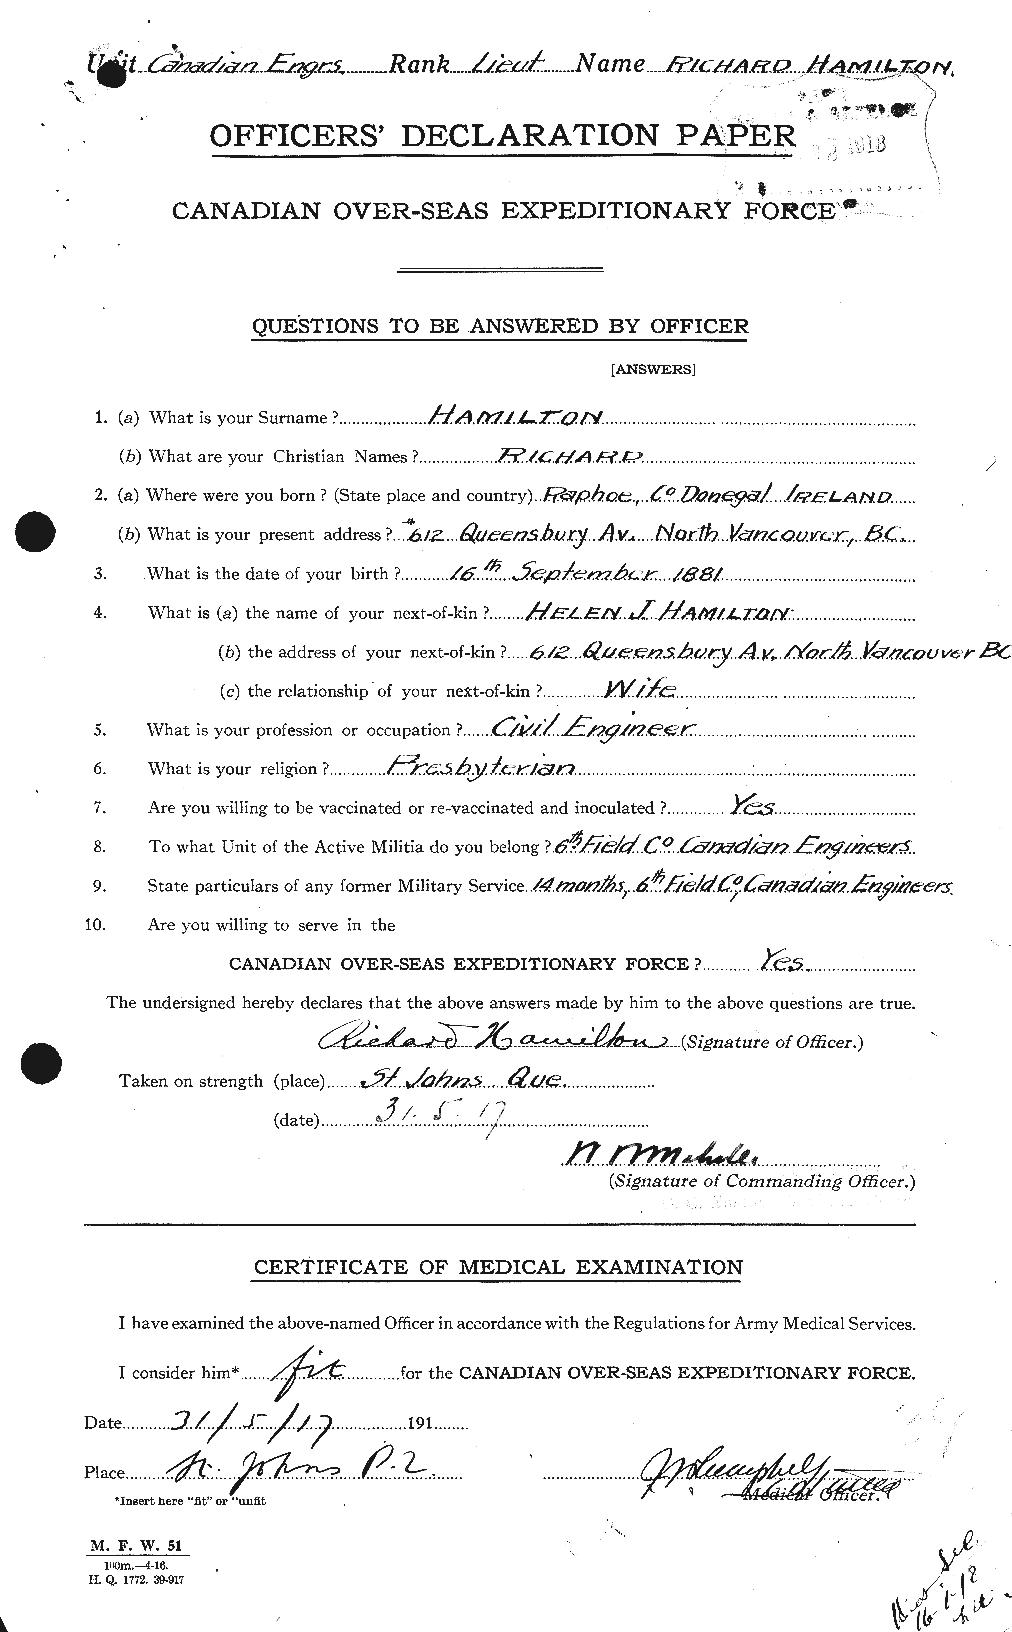 Personnel Records of the First World War - CEF 373214a